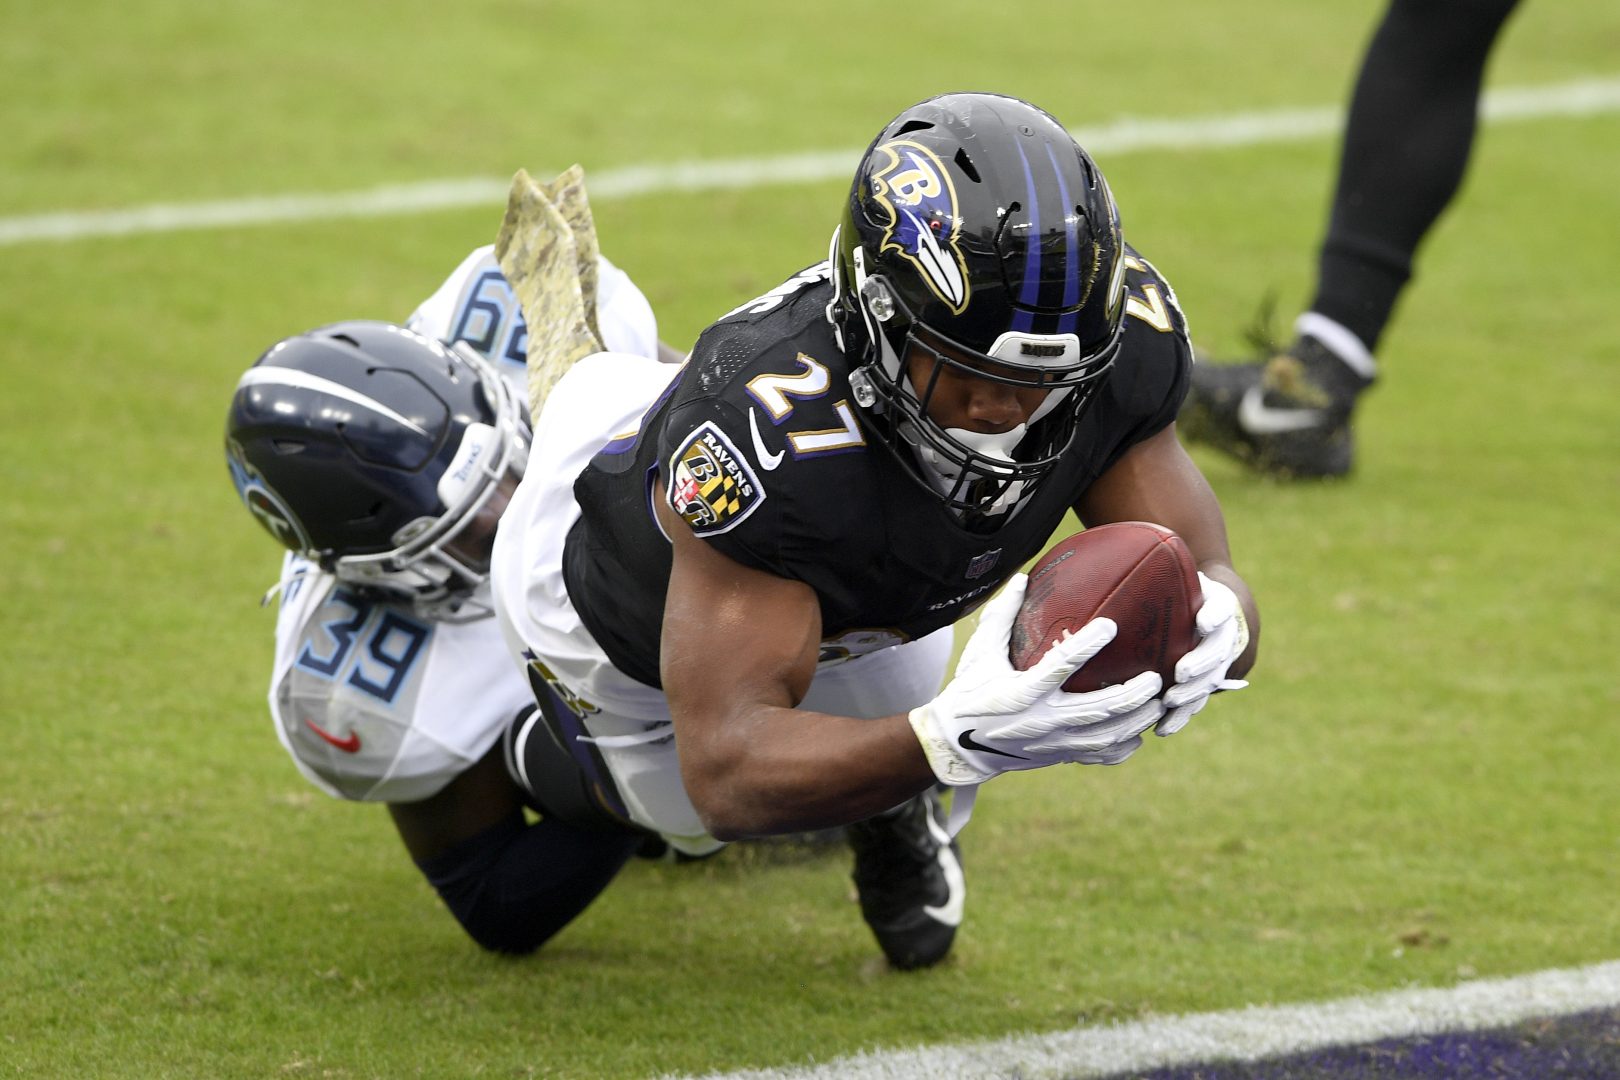 nfl football tennessee titans at baltimore ravens